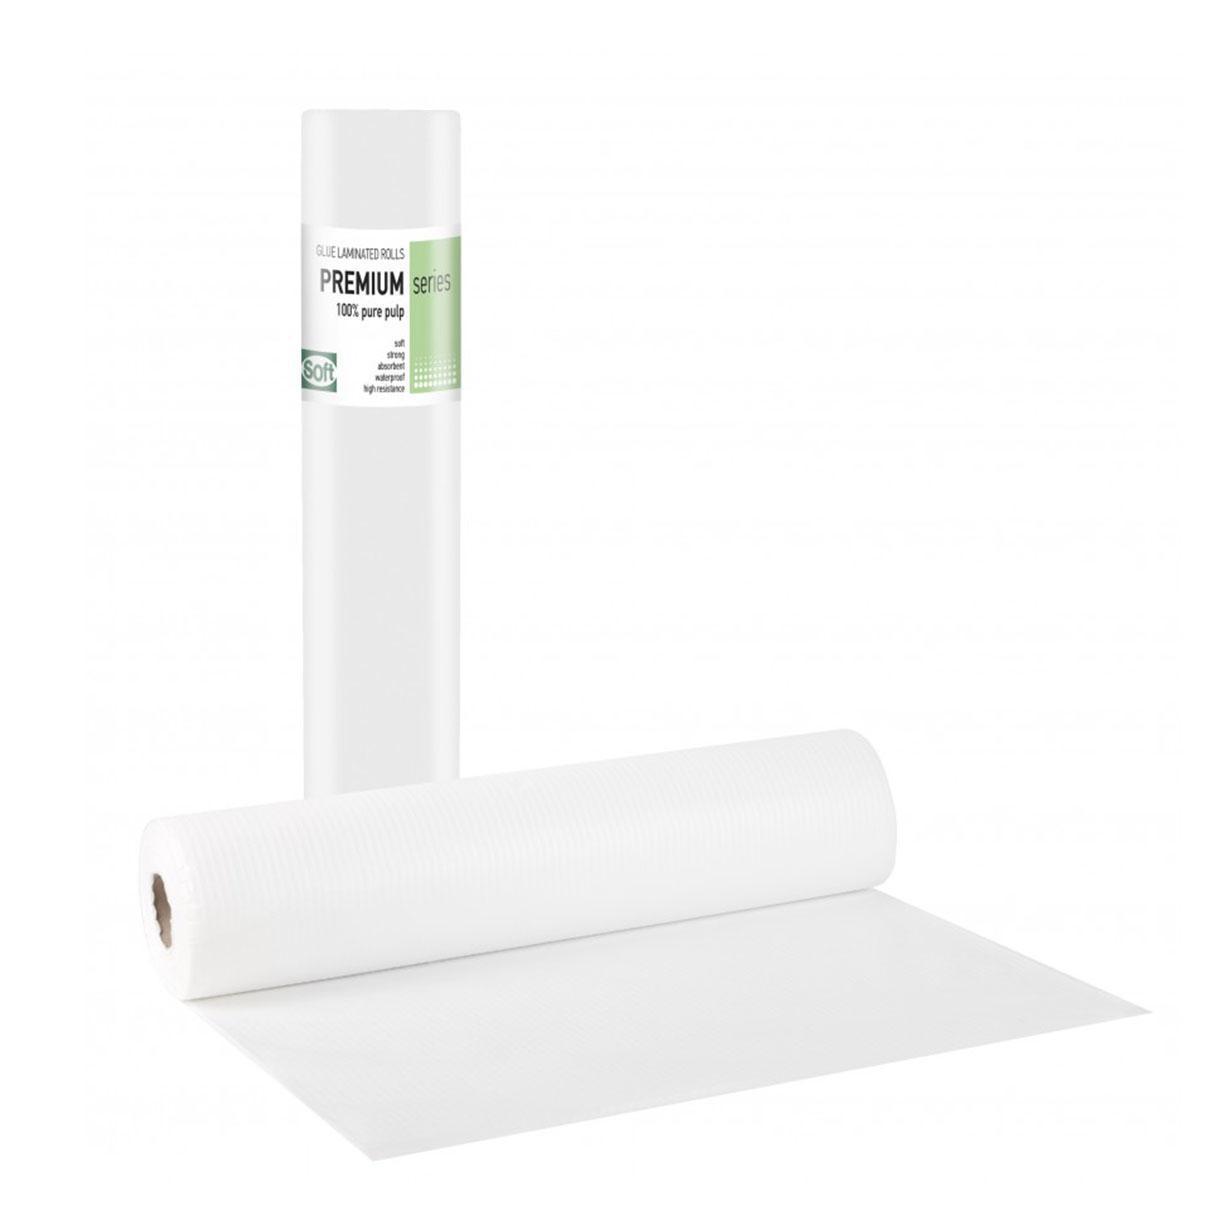 Laminated paper roll with glue Accessories